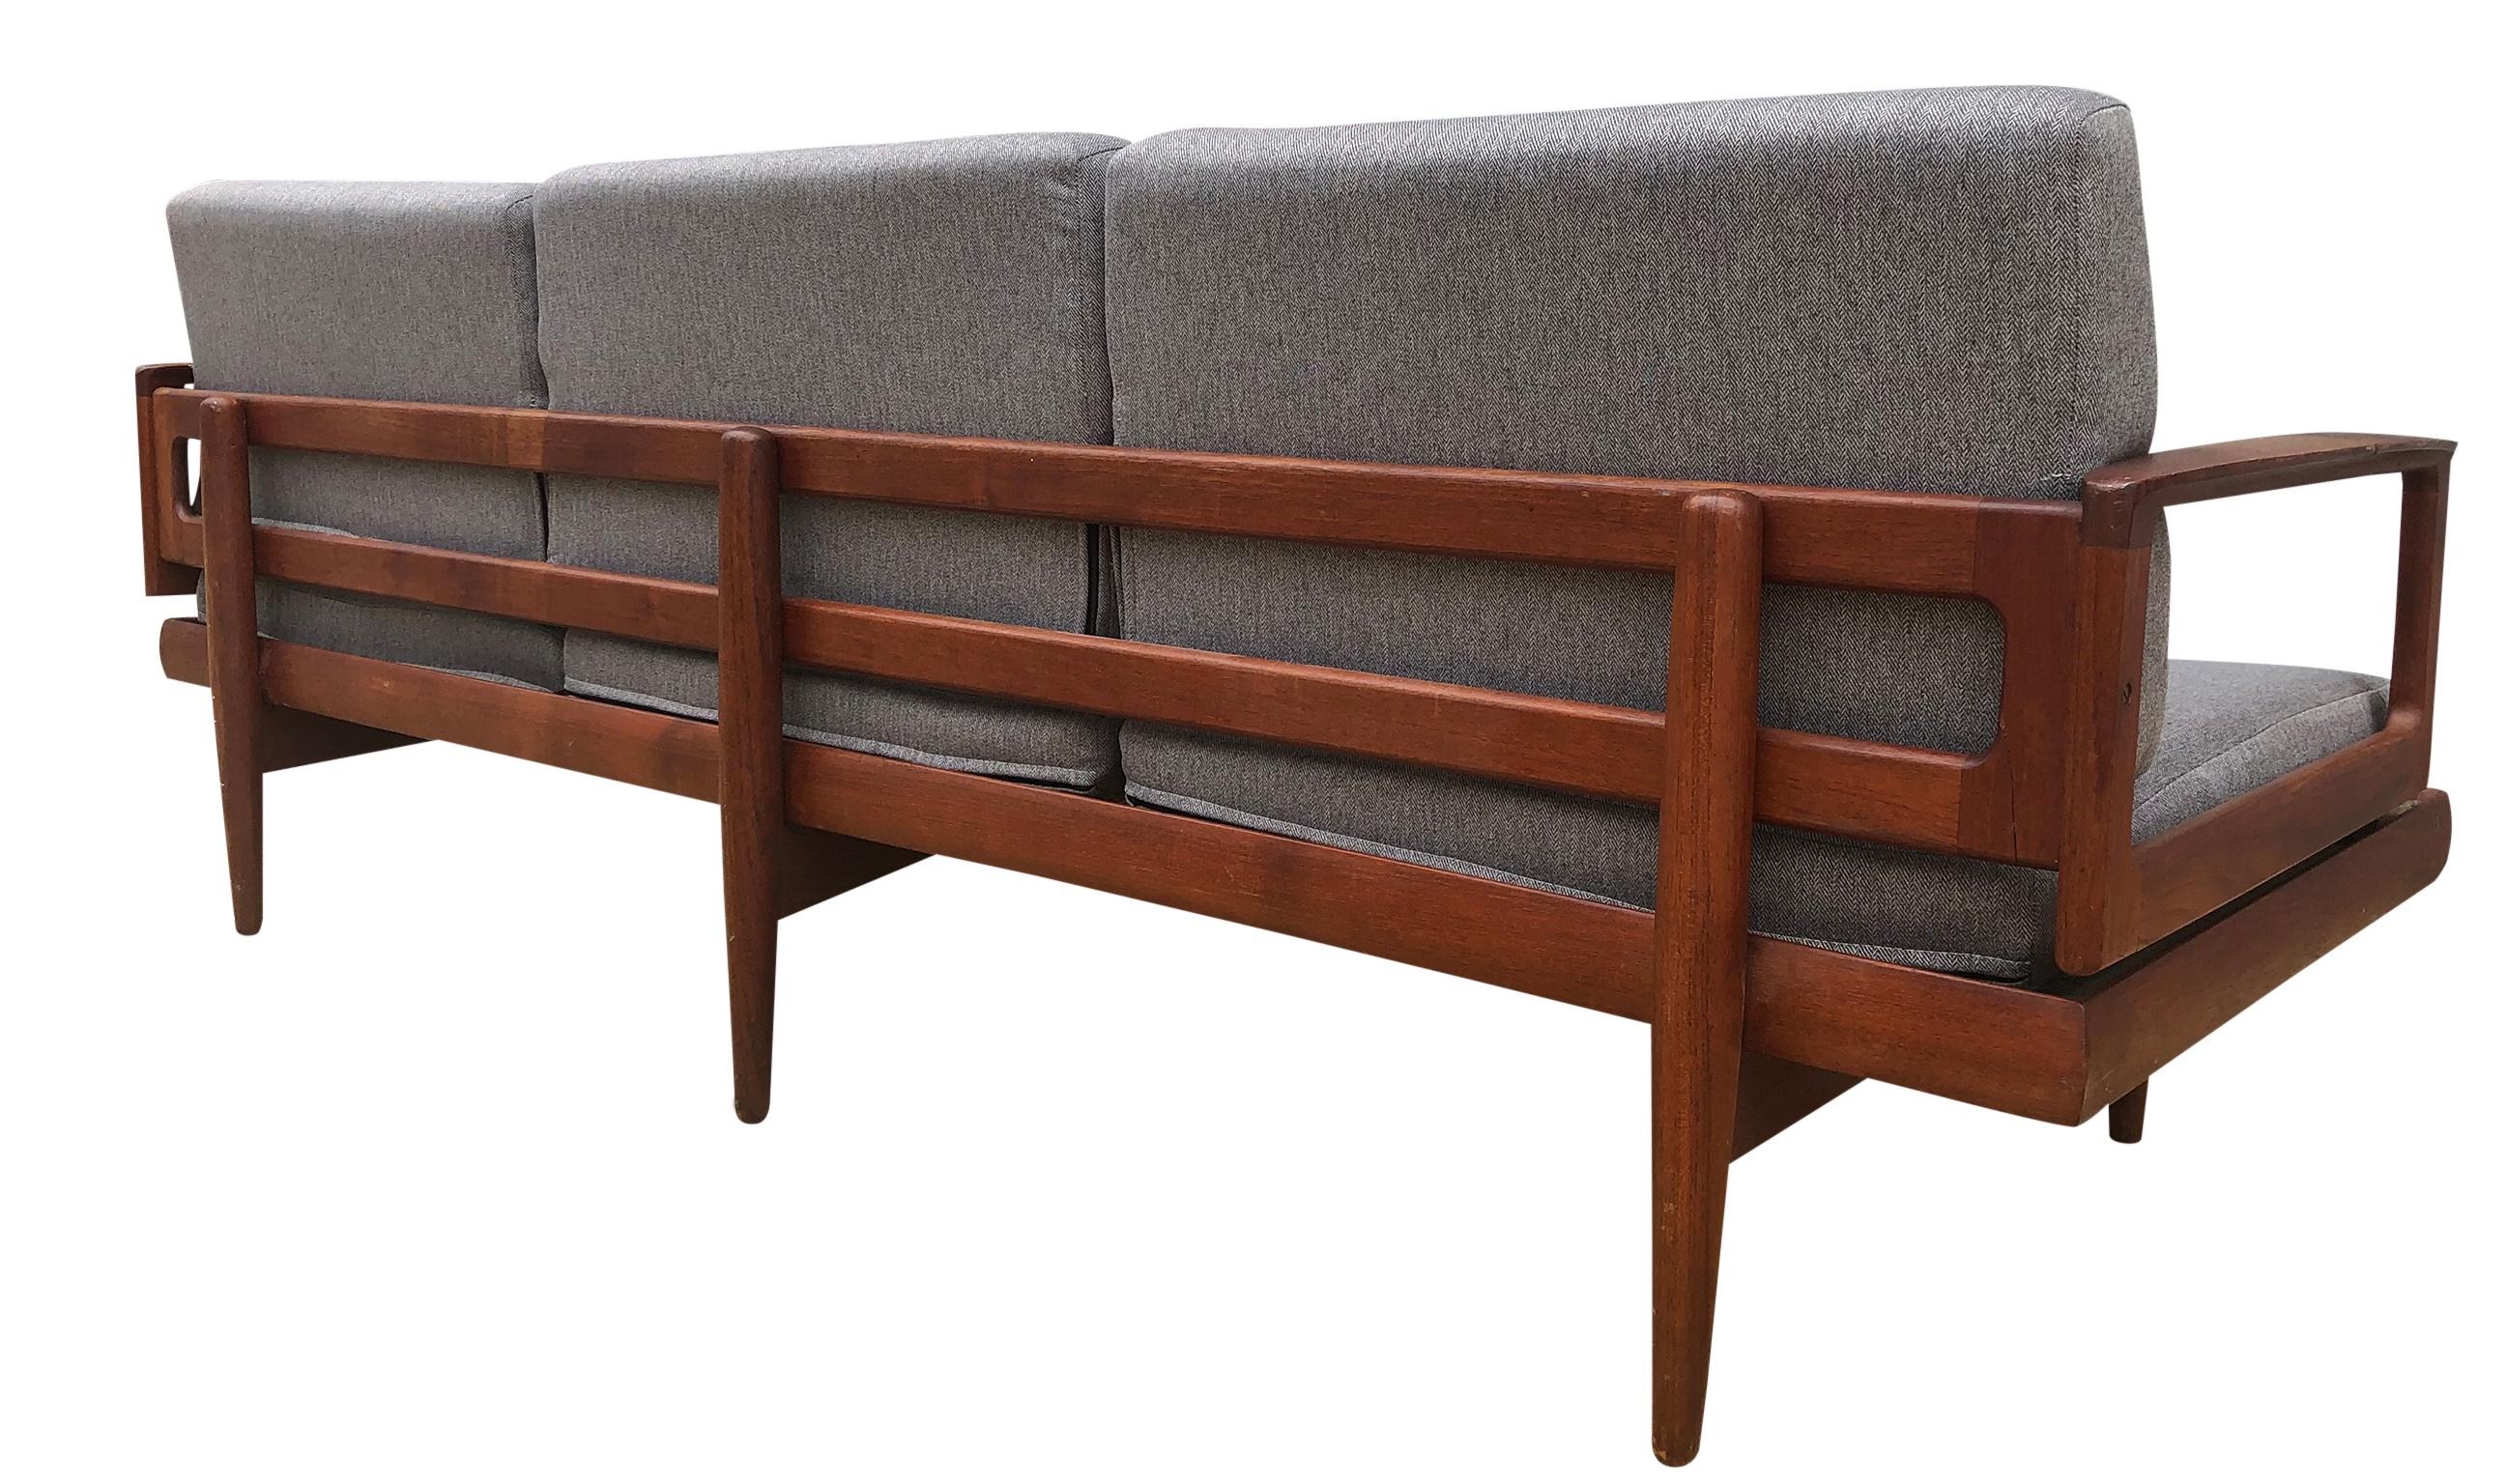 Beautiful vintage 1960s low Danish three-seat sofa daybed with amazing solid Teak wood frame with original patina has all new Pirelli rubber upholstery straps. Has modern grey cushions with grey herringbone woven upholstery in great condition. Made